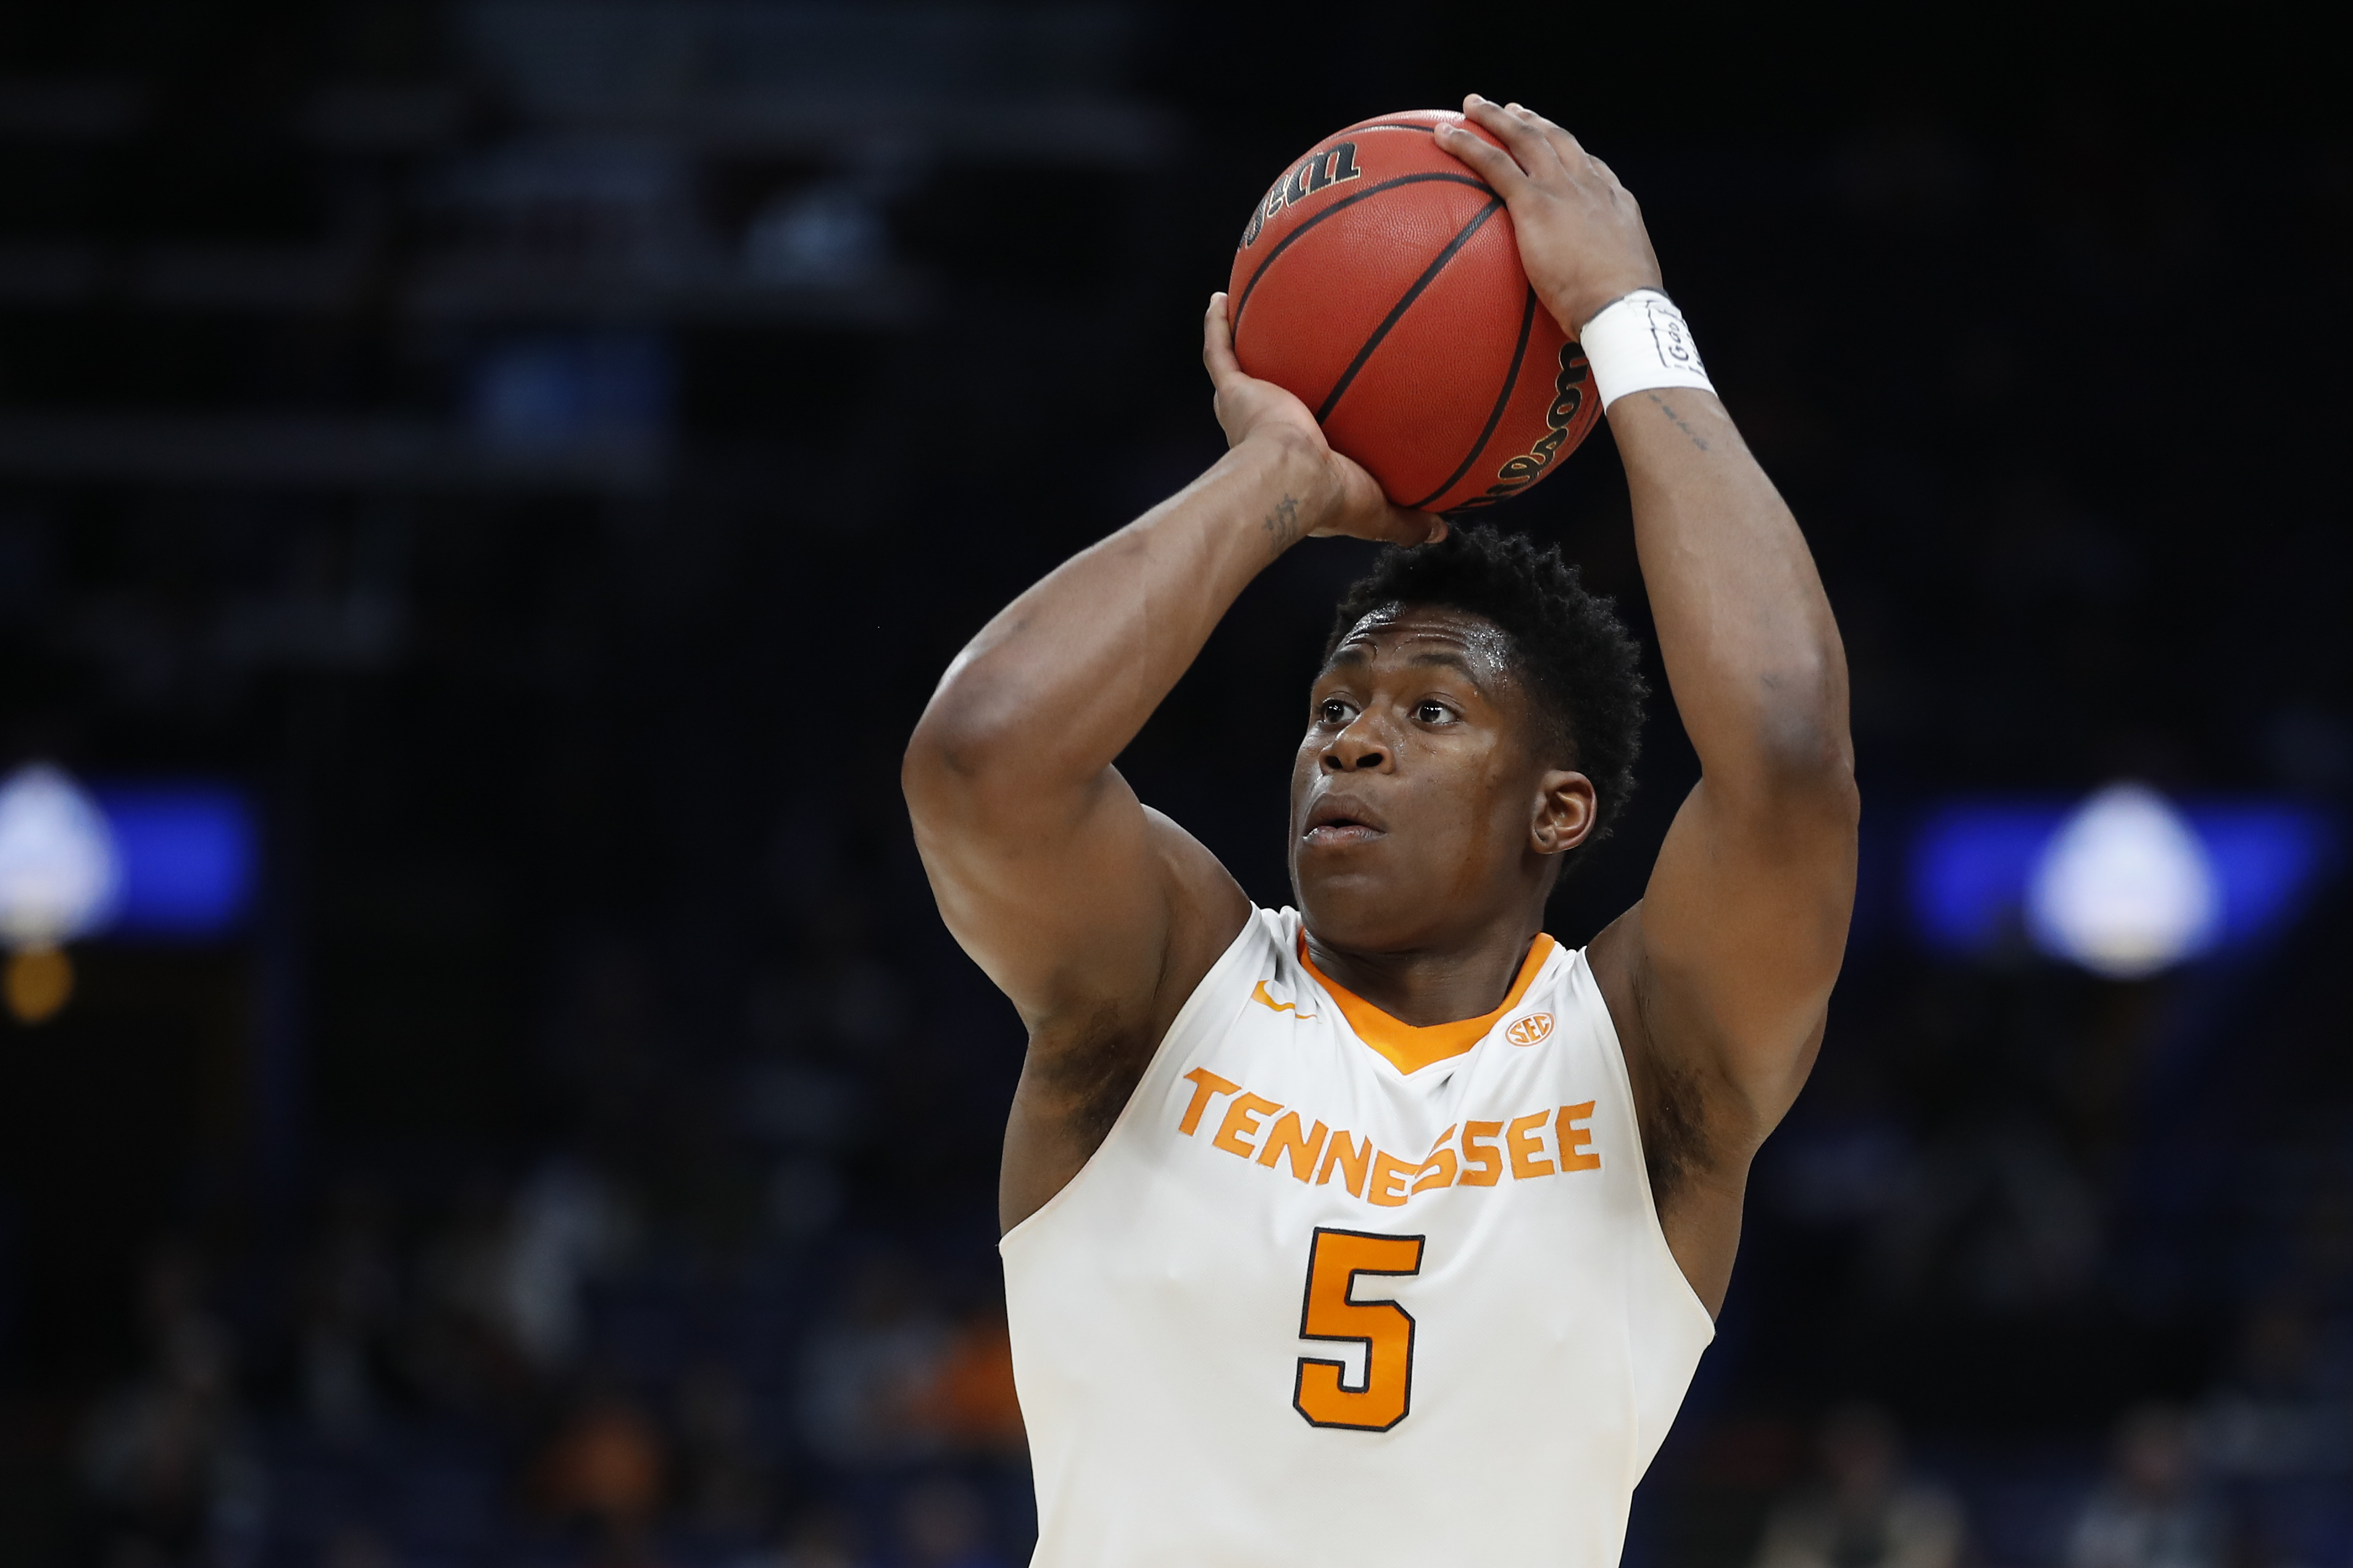 Admiral Schofield Named Sec Player Of The Week